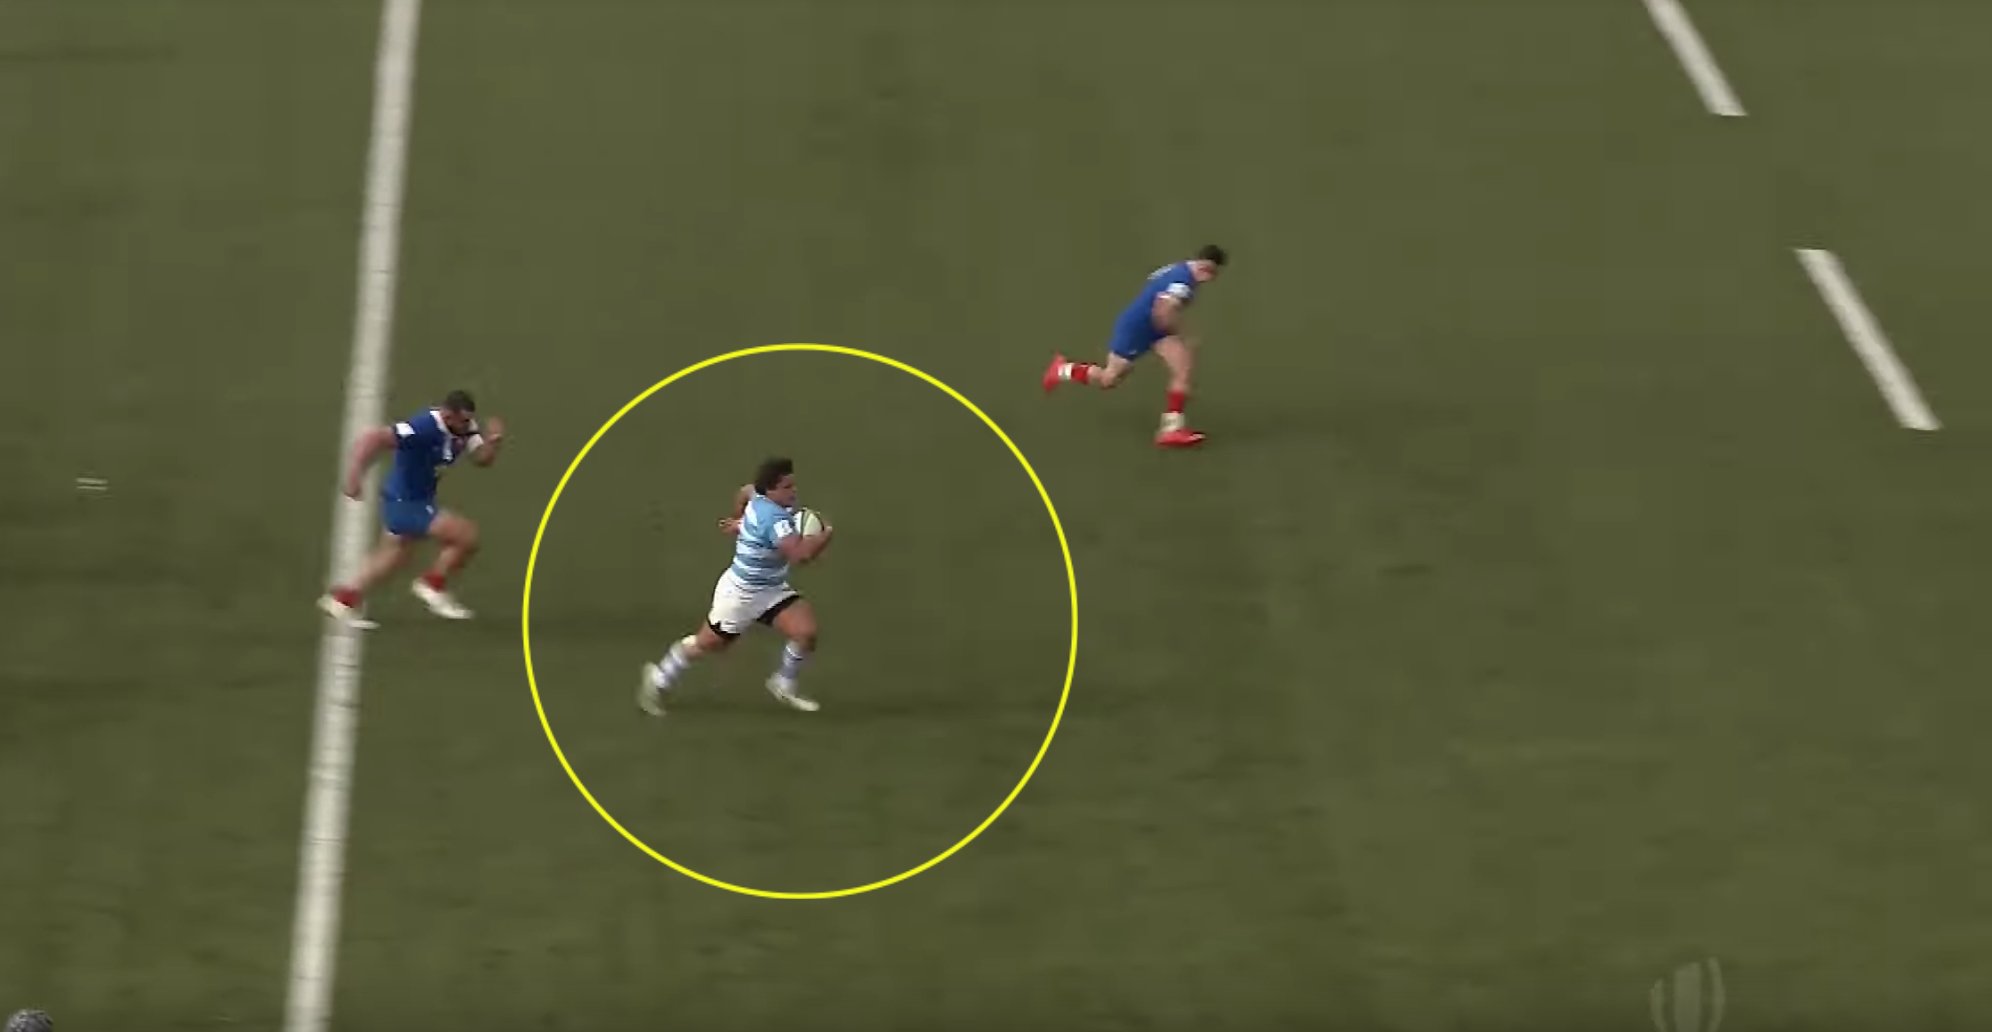 A Prop being hailed by many as "Rugby's Maradona" just scored a 60m solo wonder try